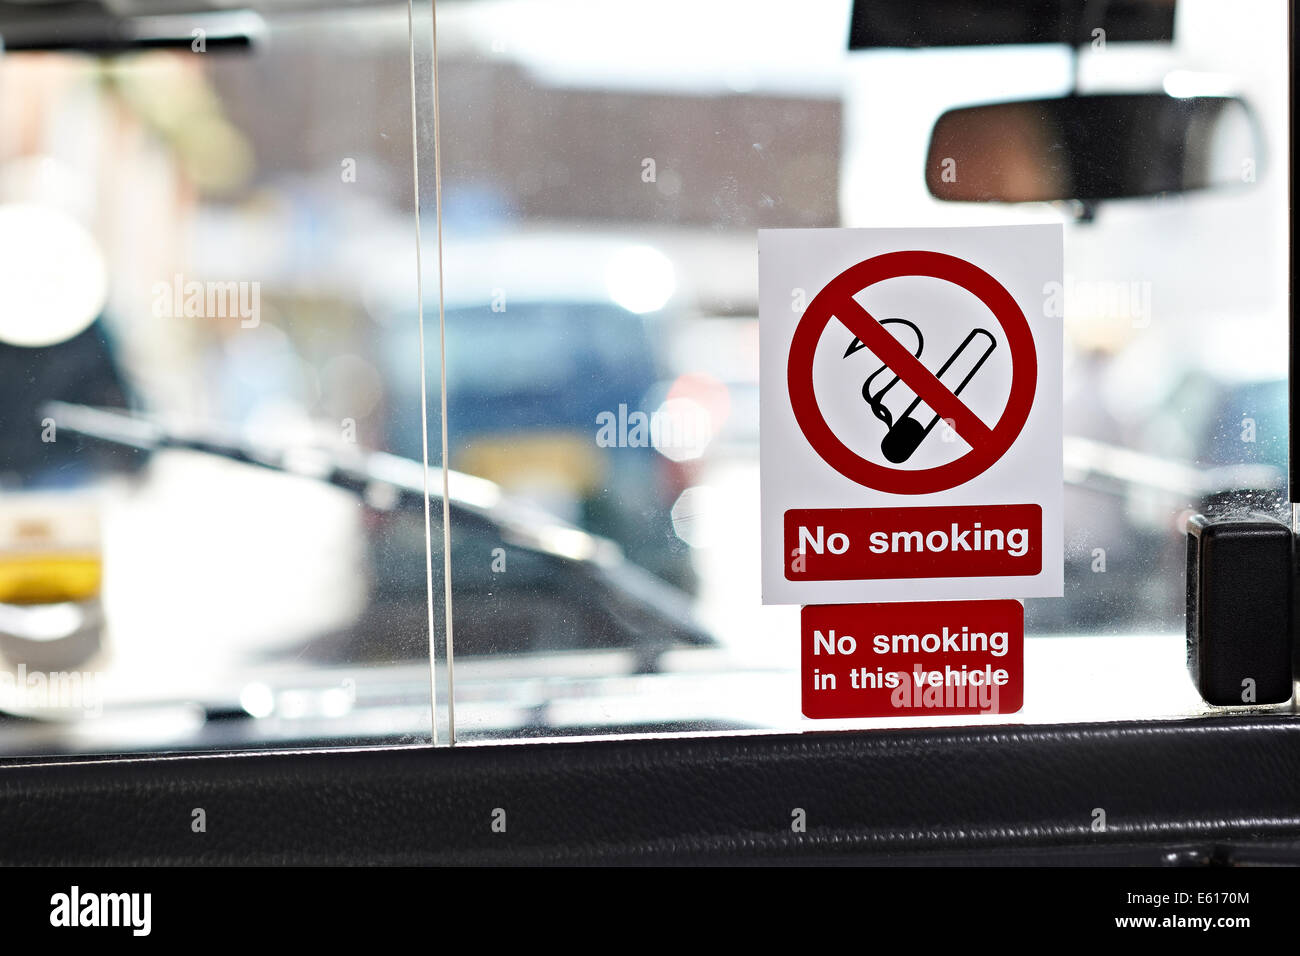 No smoking in this vehicle sign, pictured in a UK taxi or black cab Stock Photo